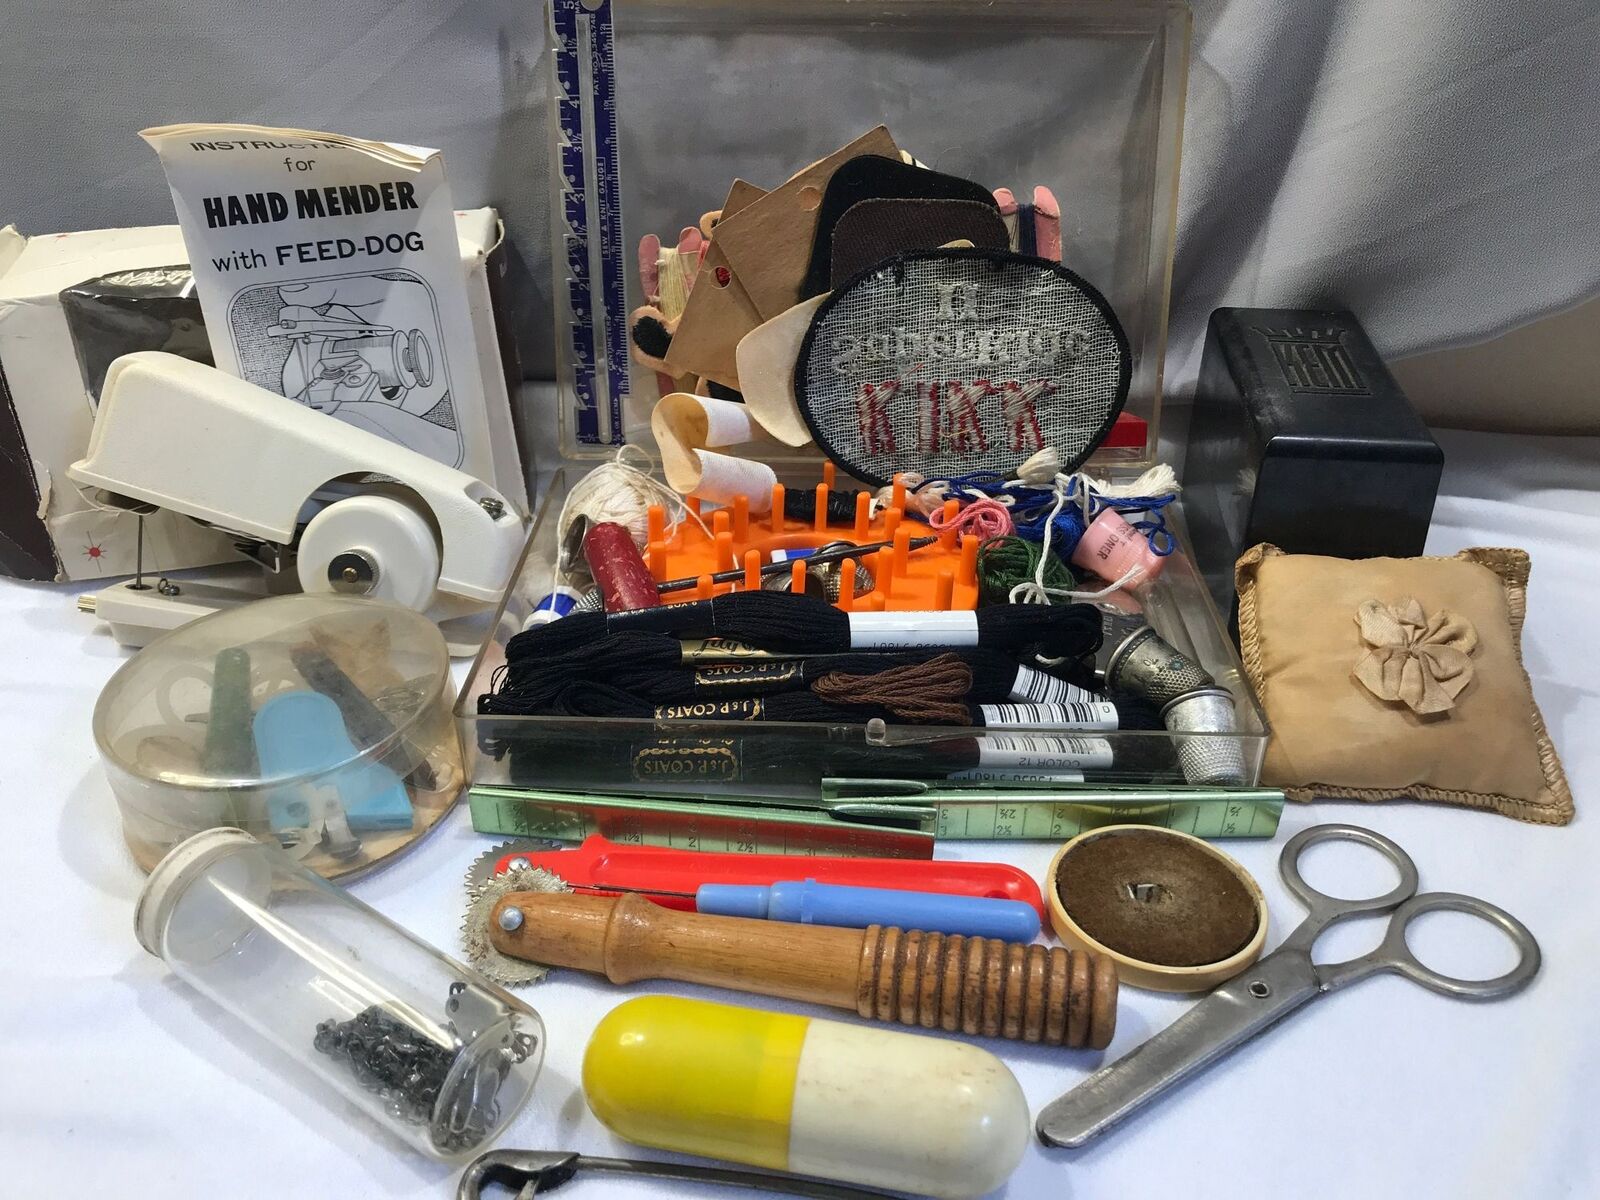 Vintage sewing kit lot, hand mender, mixed lot of many different sewing and mend